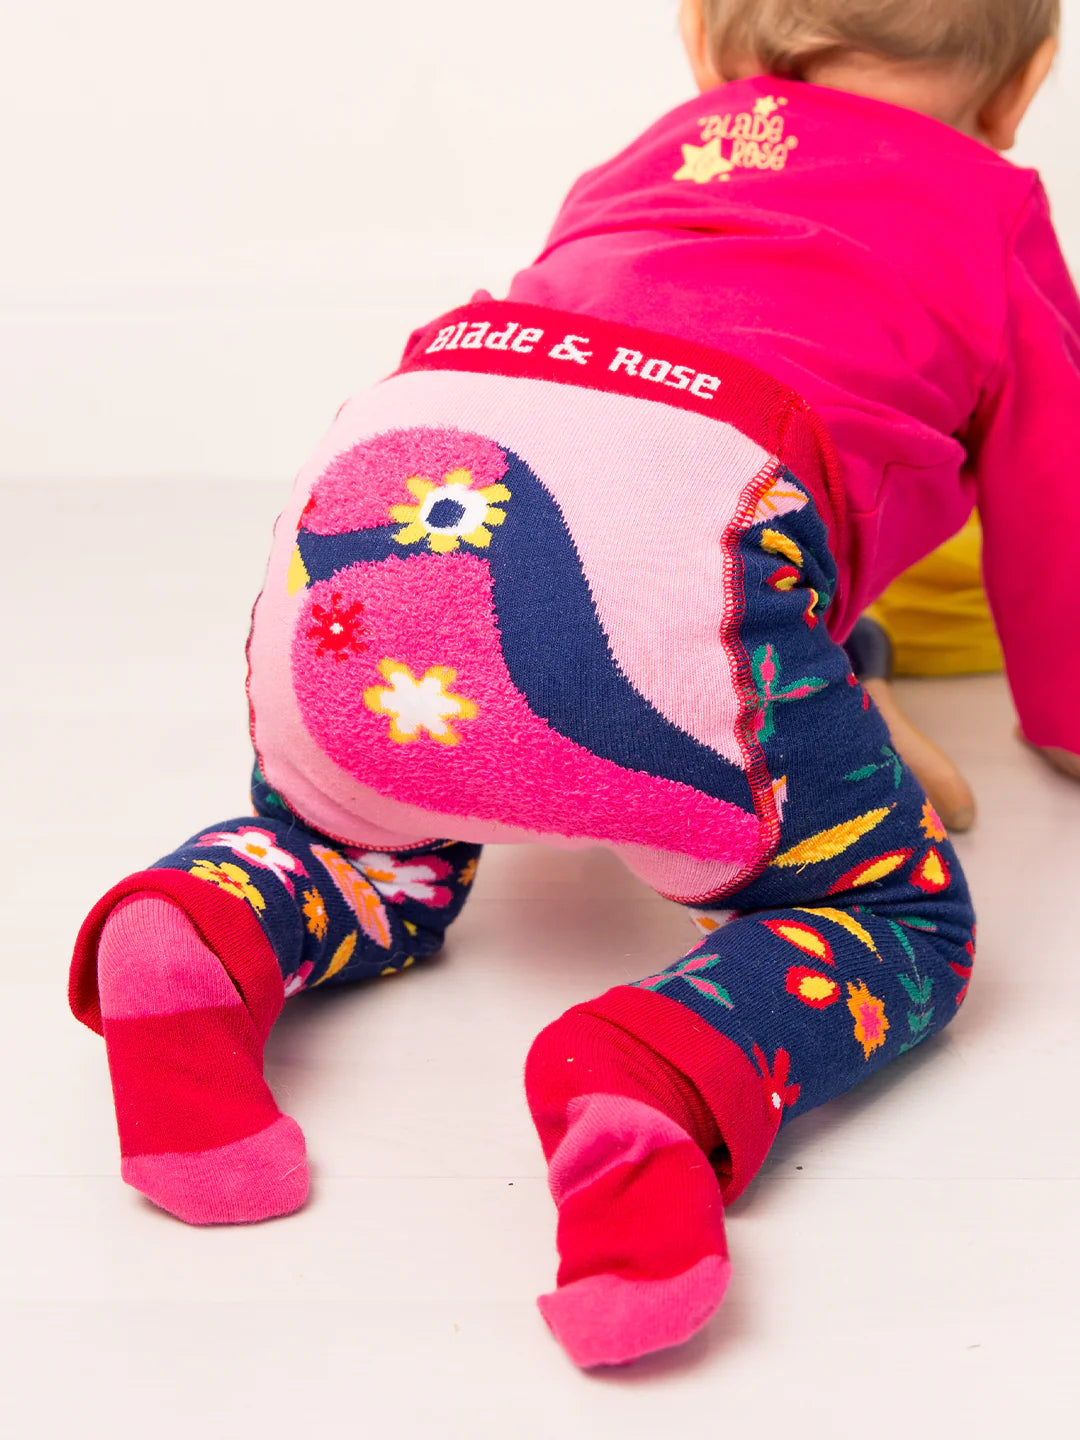 blade & rose layla the parrot leggings at whippersnappers online